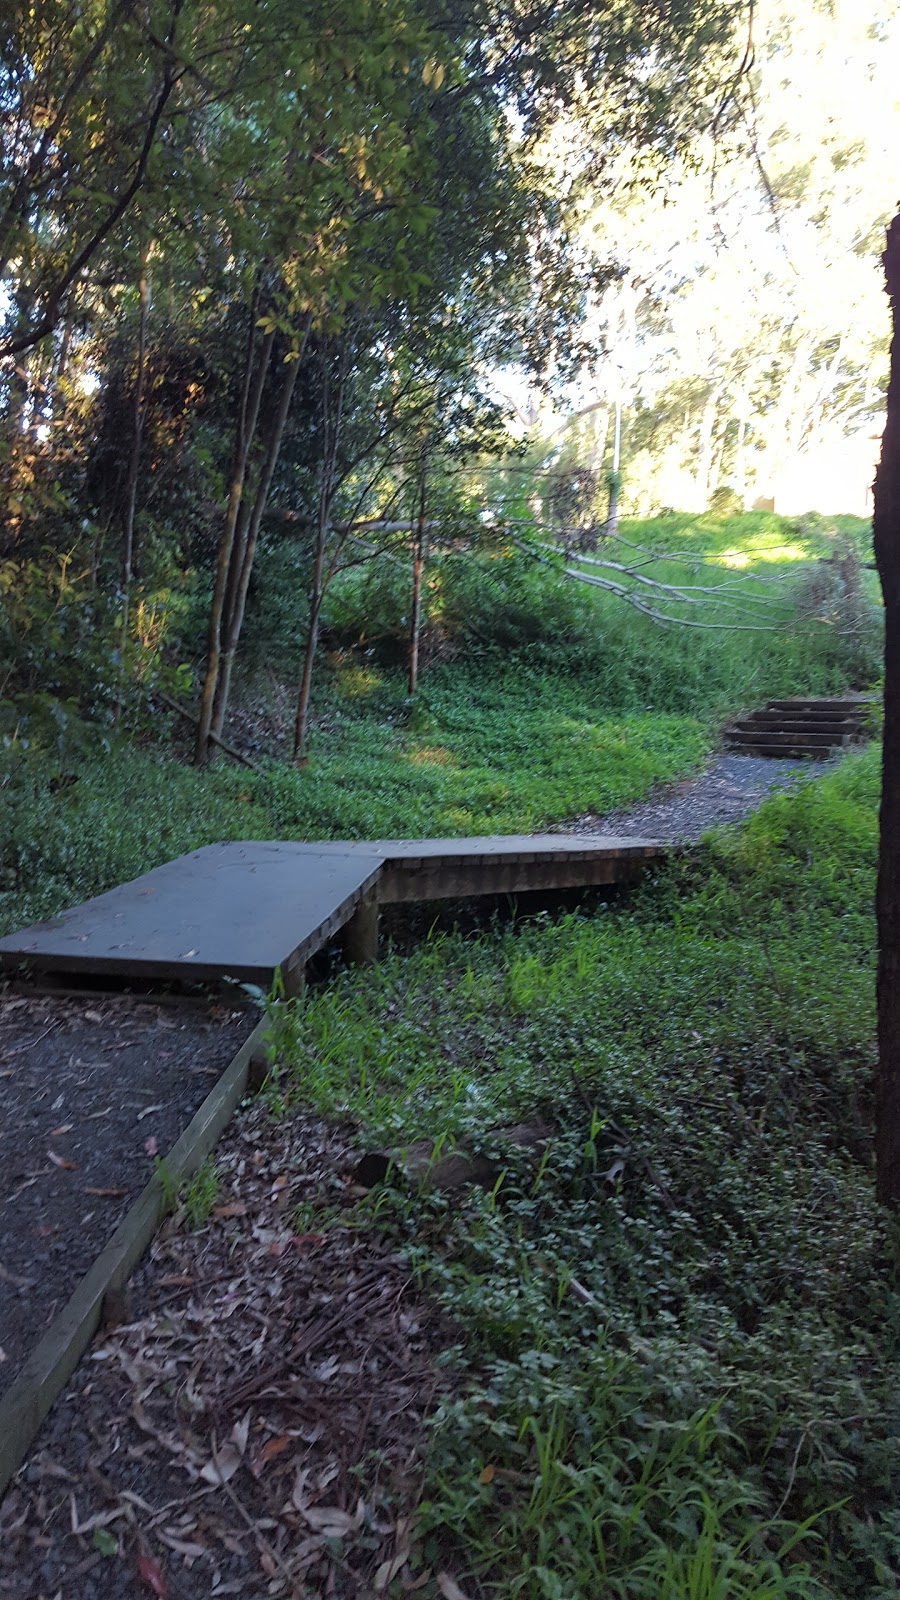 Mount Wilberforce Lookout Reserve | 7 Castle Hill Rd, West Pennant Hills NSW 2125, Australia | Phone: 1300 426 654